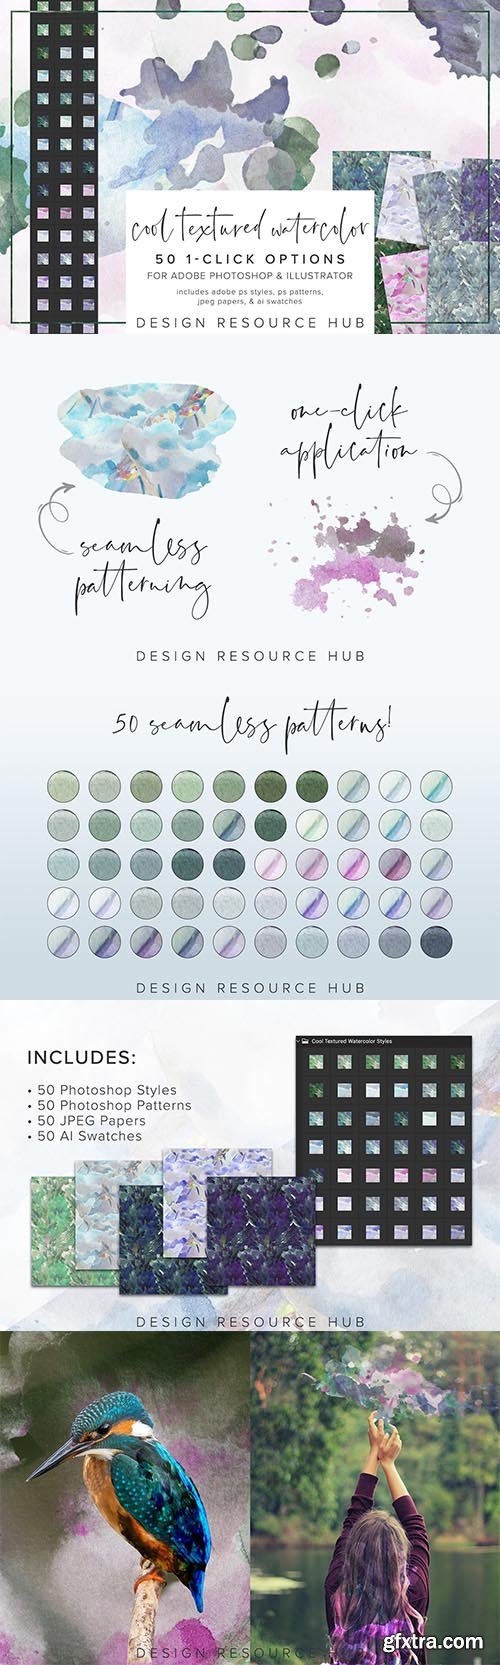 CreativeMarket - Cool Textured Watercolor PS Styles 6966015